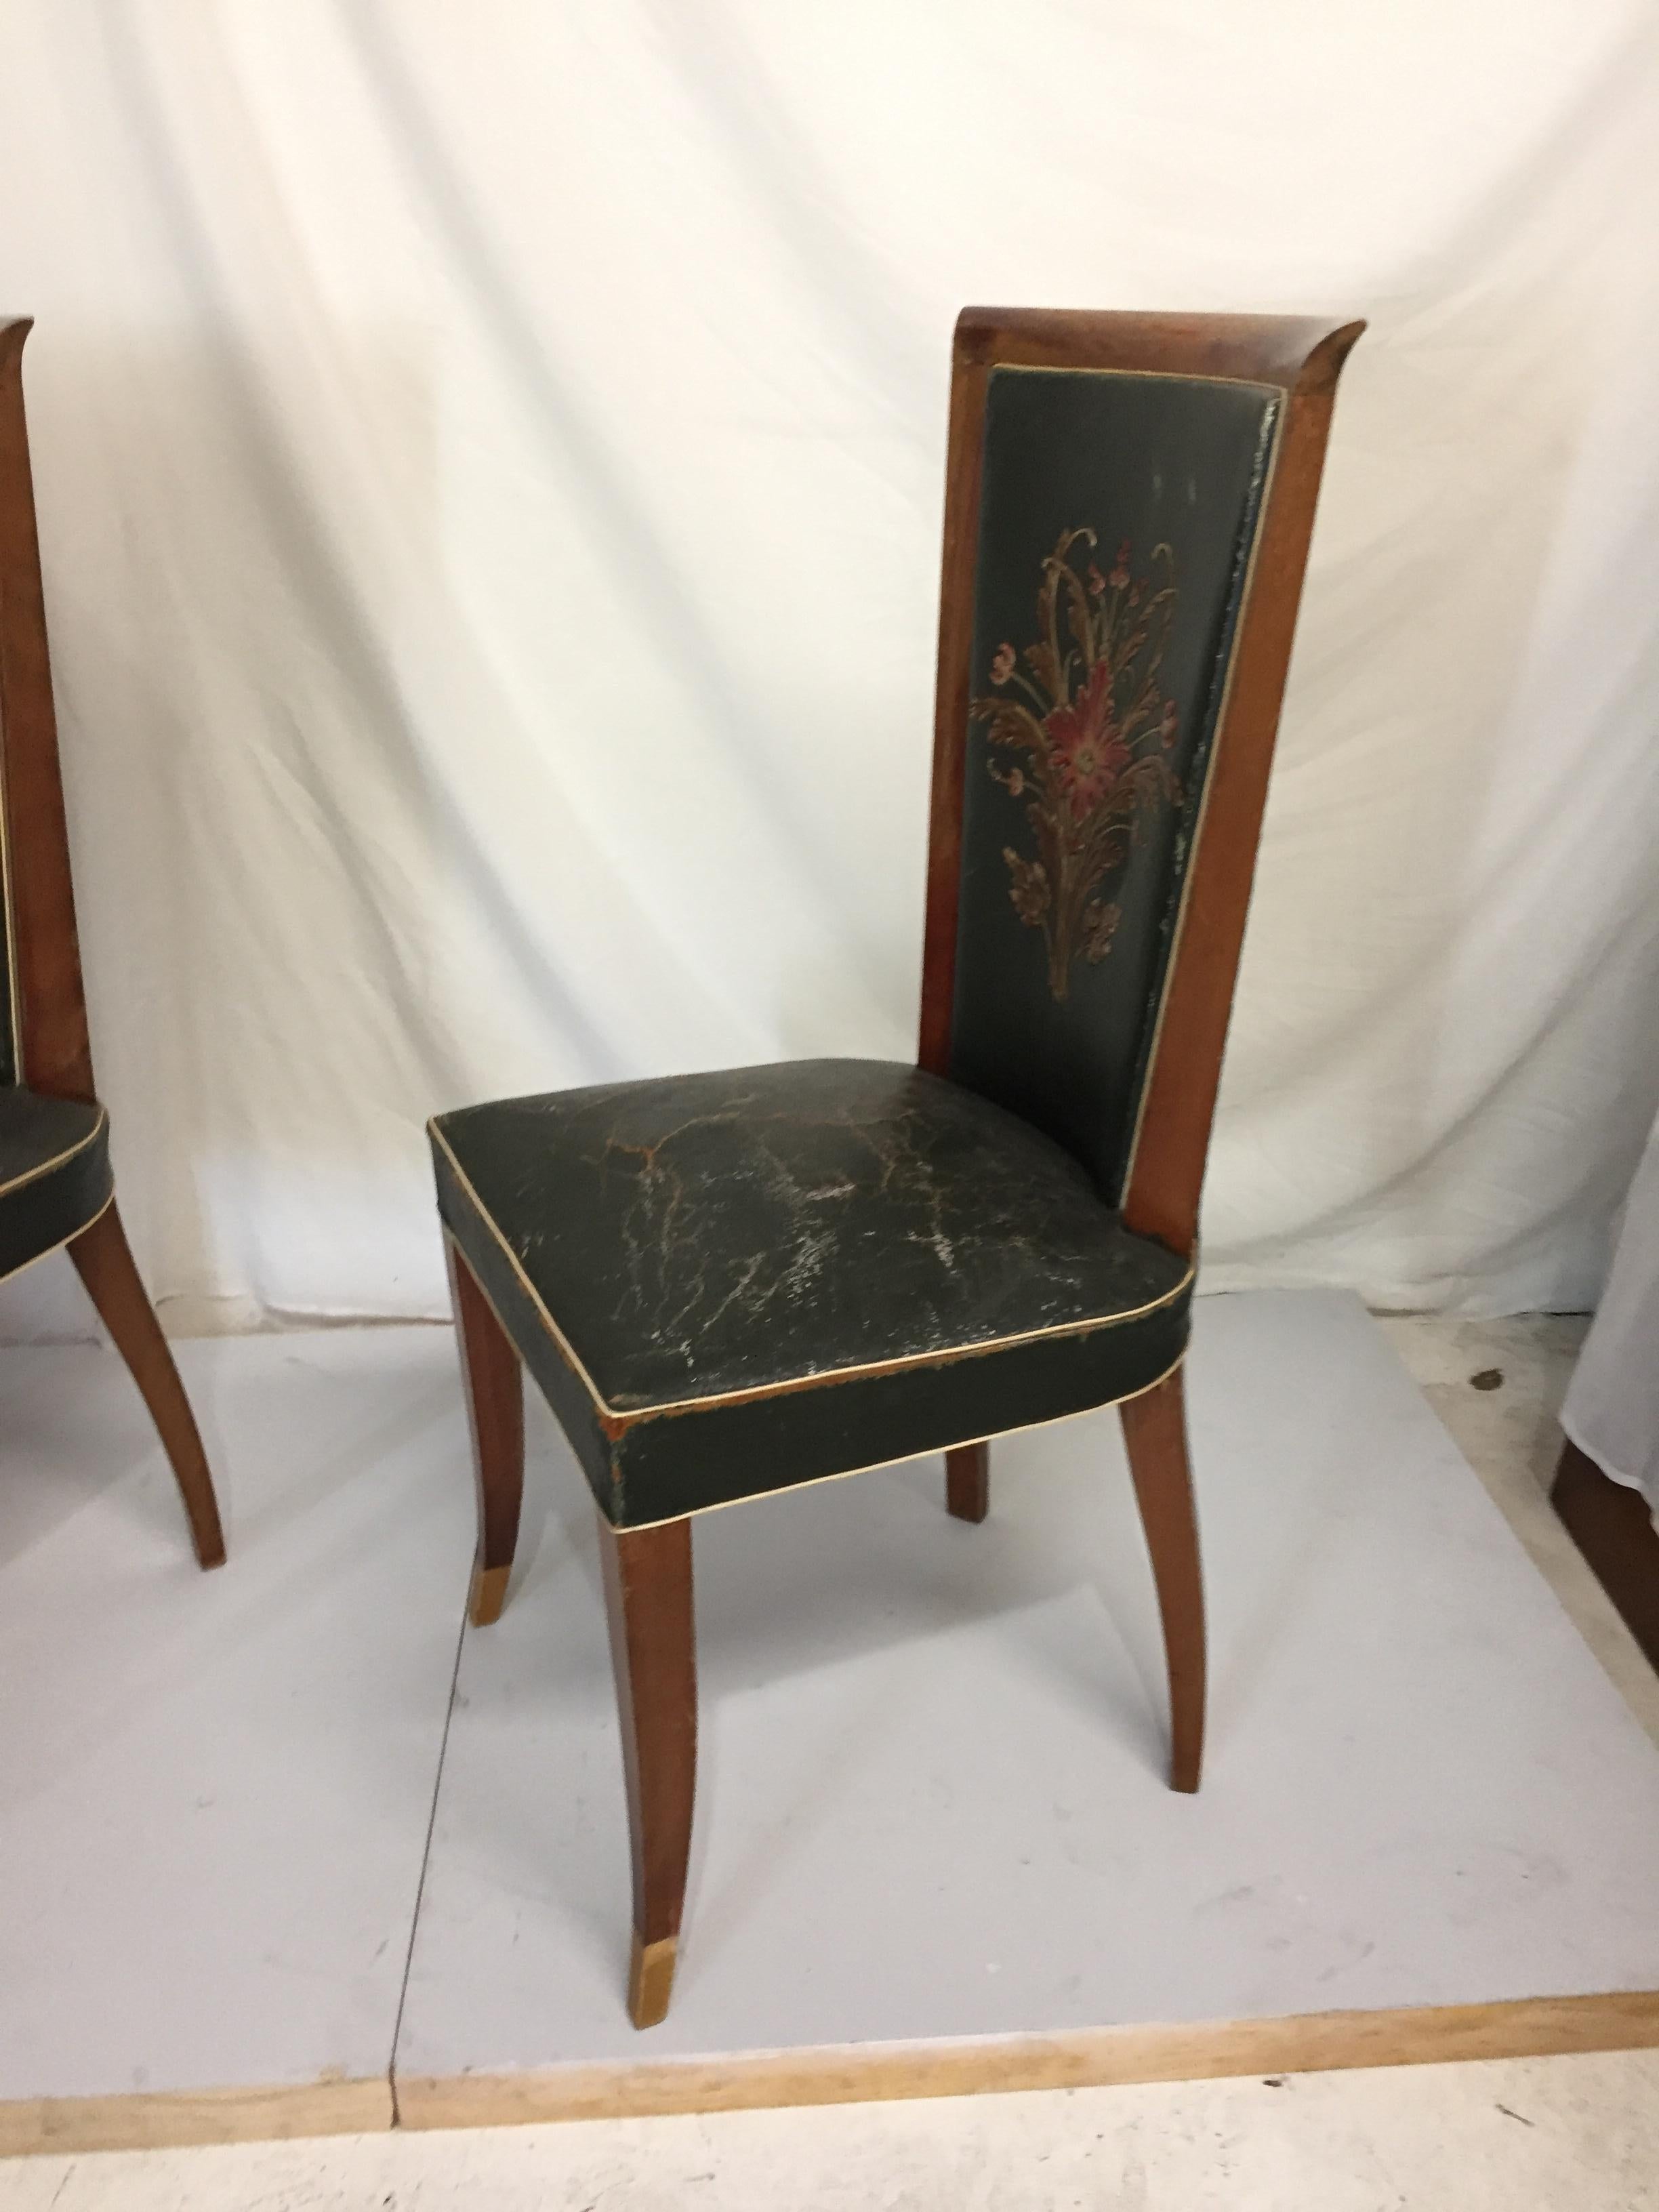 Six Art Deco Chairs in Green Leather Original Condition In Fair Condition For Sale In Miami, FL